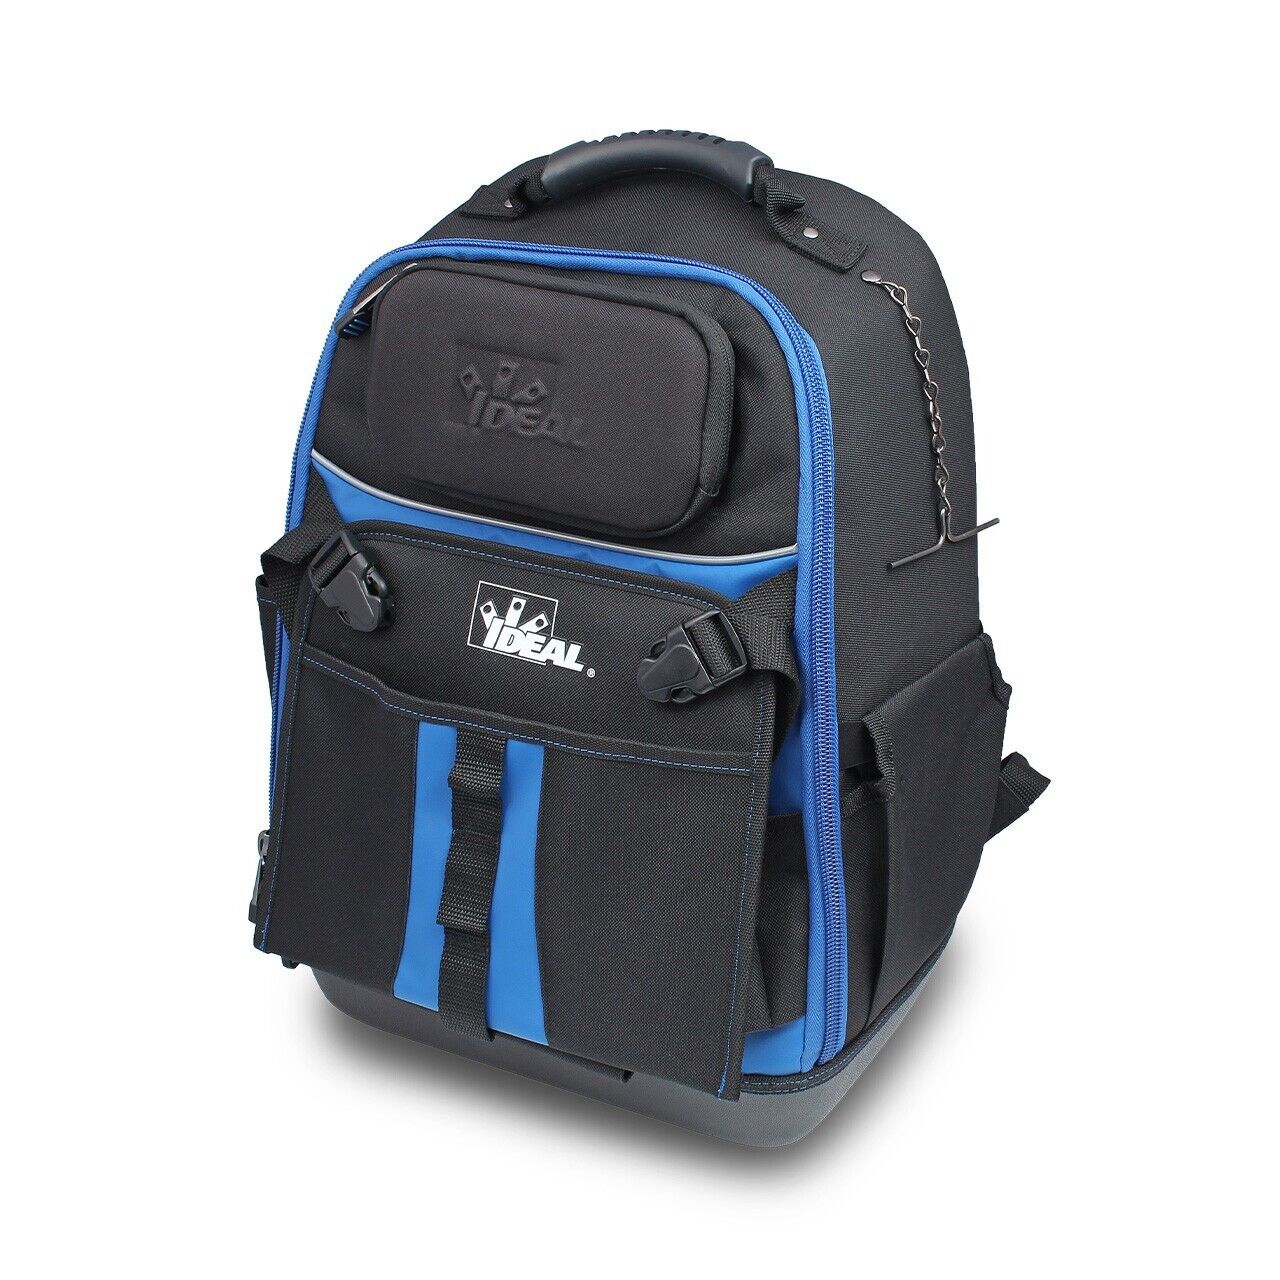 IDEAL 37-001 Pro Series Single Compartment Tool Backpack